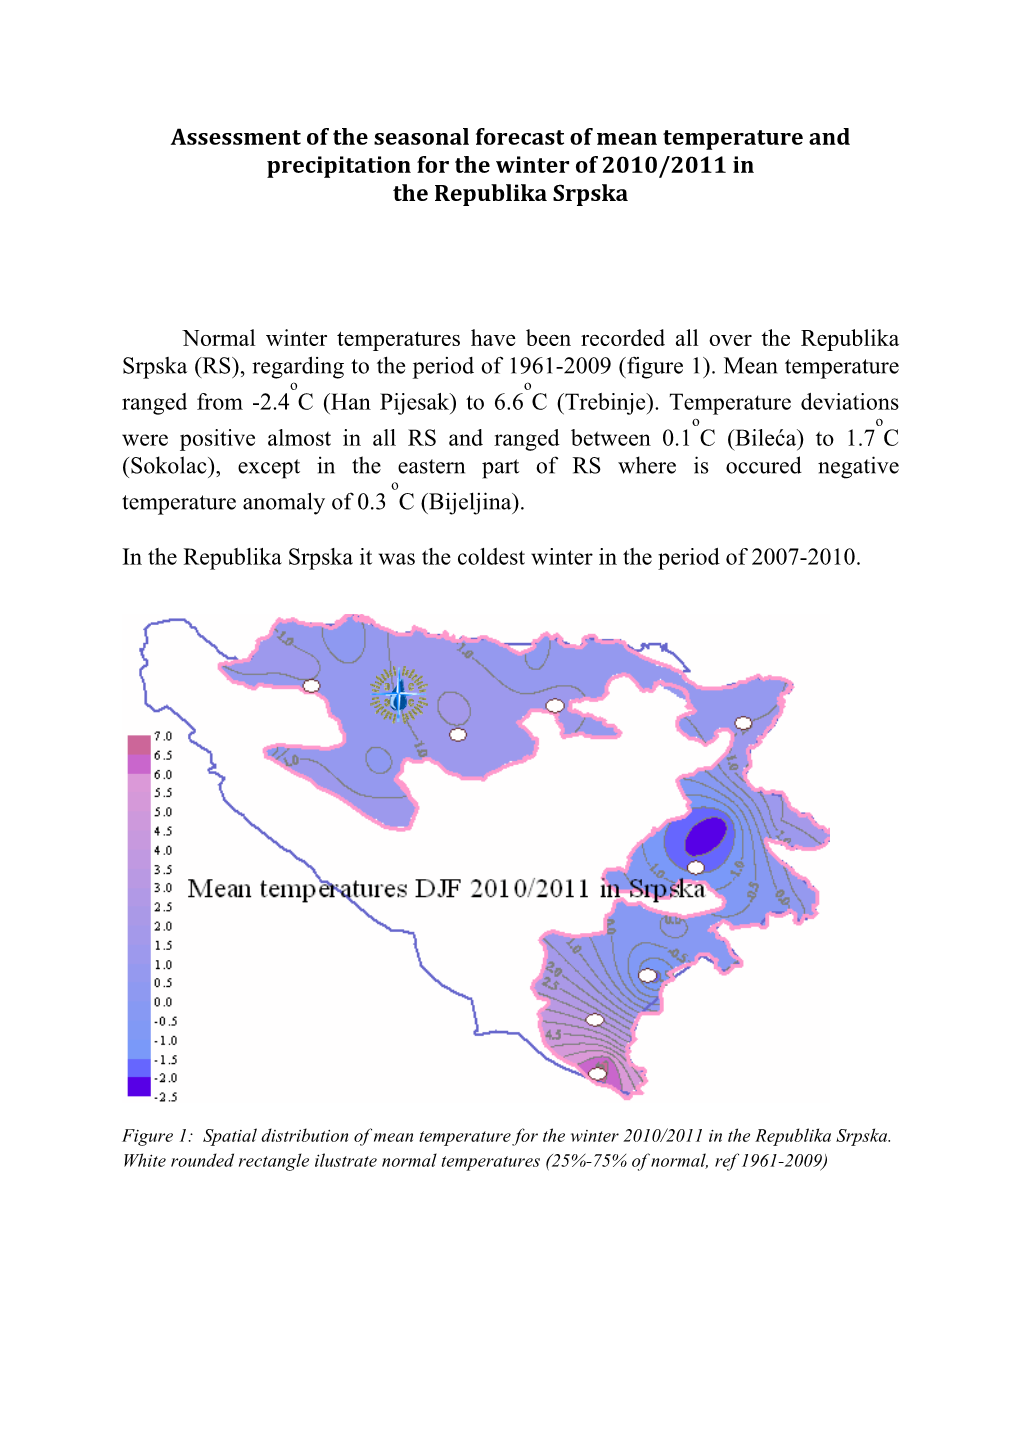 Assessment of the Seasonal Forecast of Mean Temperature and Precipitation for the Winter of 2010/2011 in the Republika Srpska